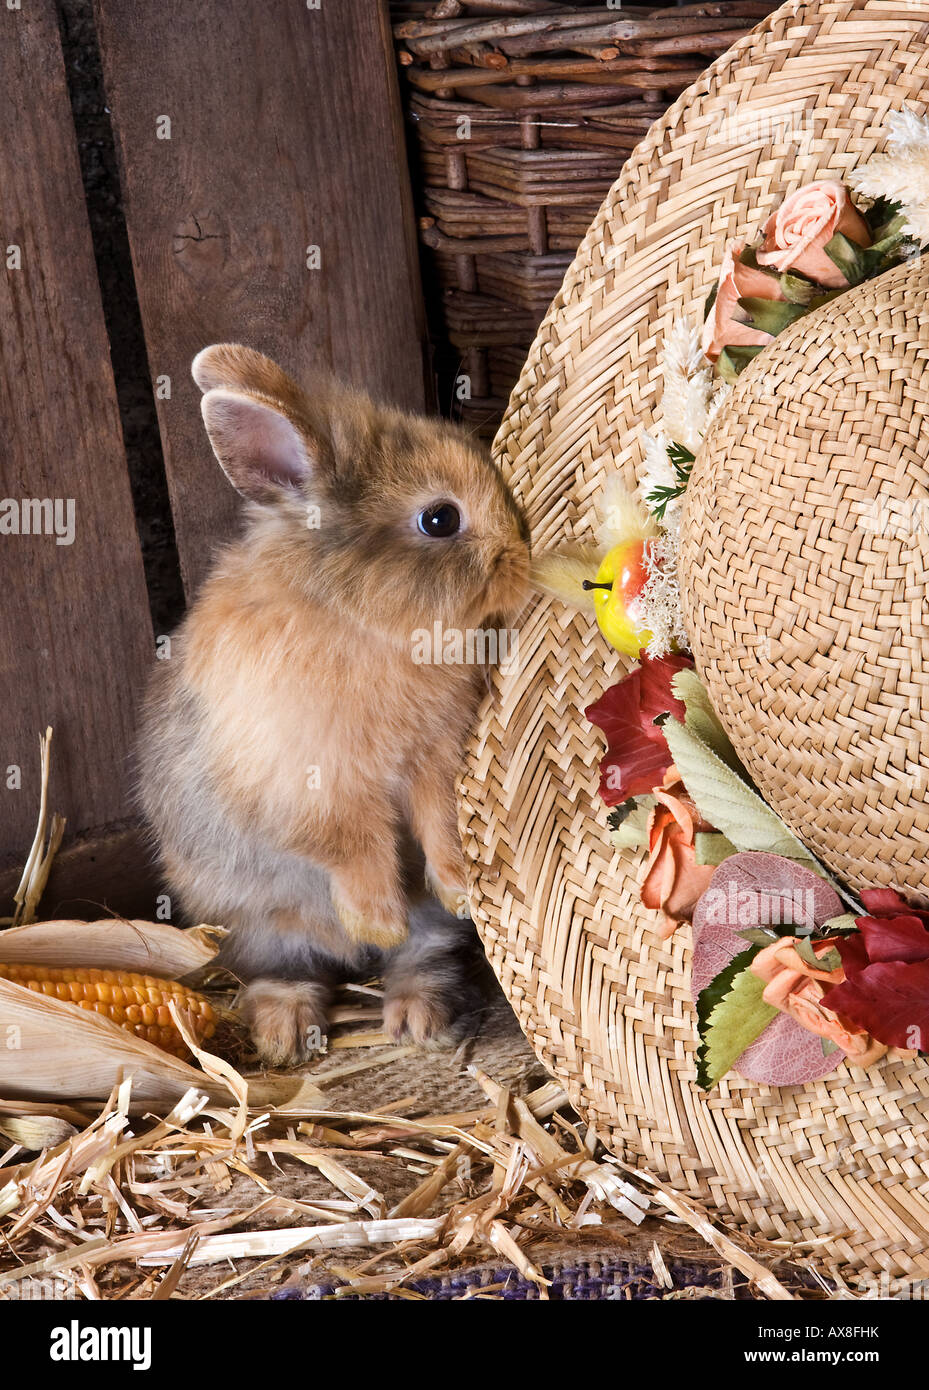 Little brown rabbit nibbling on a straw hat Stock Photo